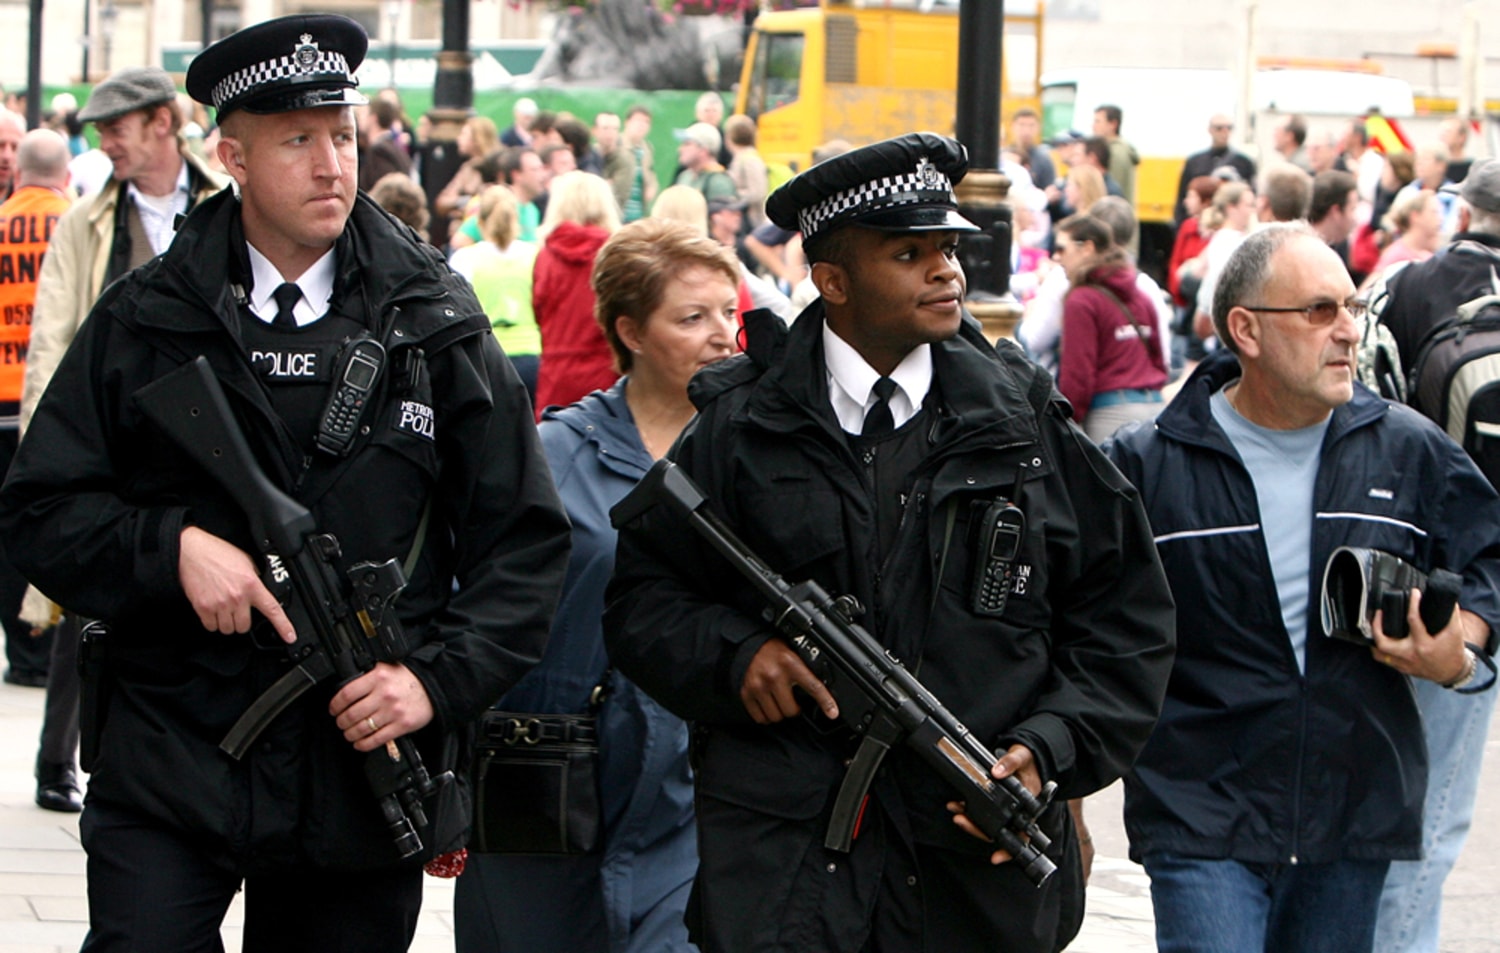 For some British bobbies a gun comes with job